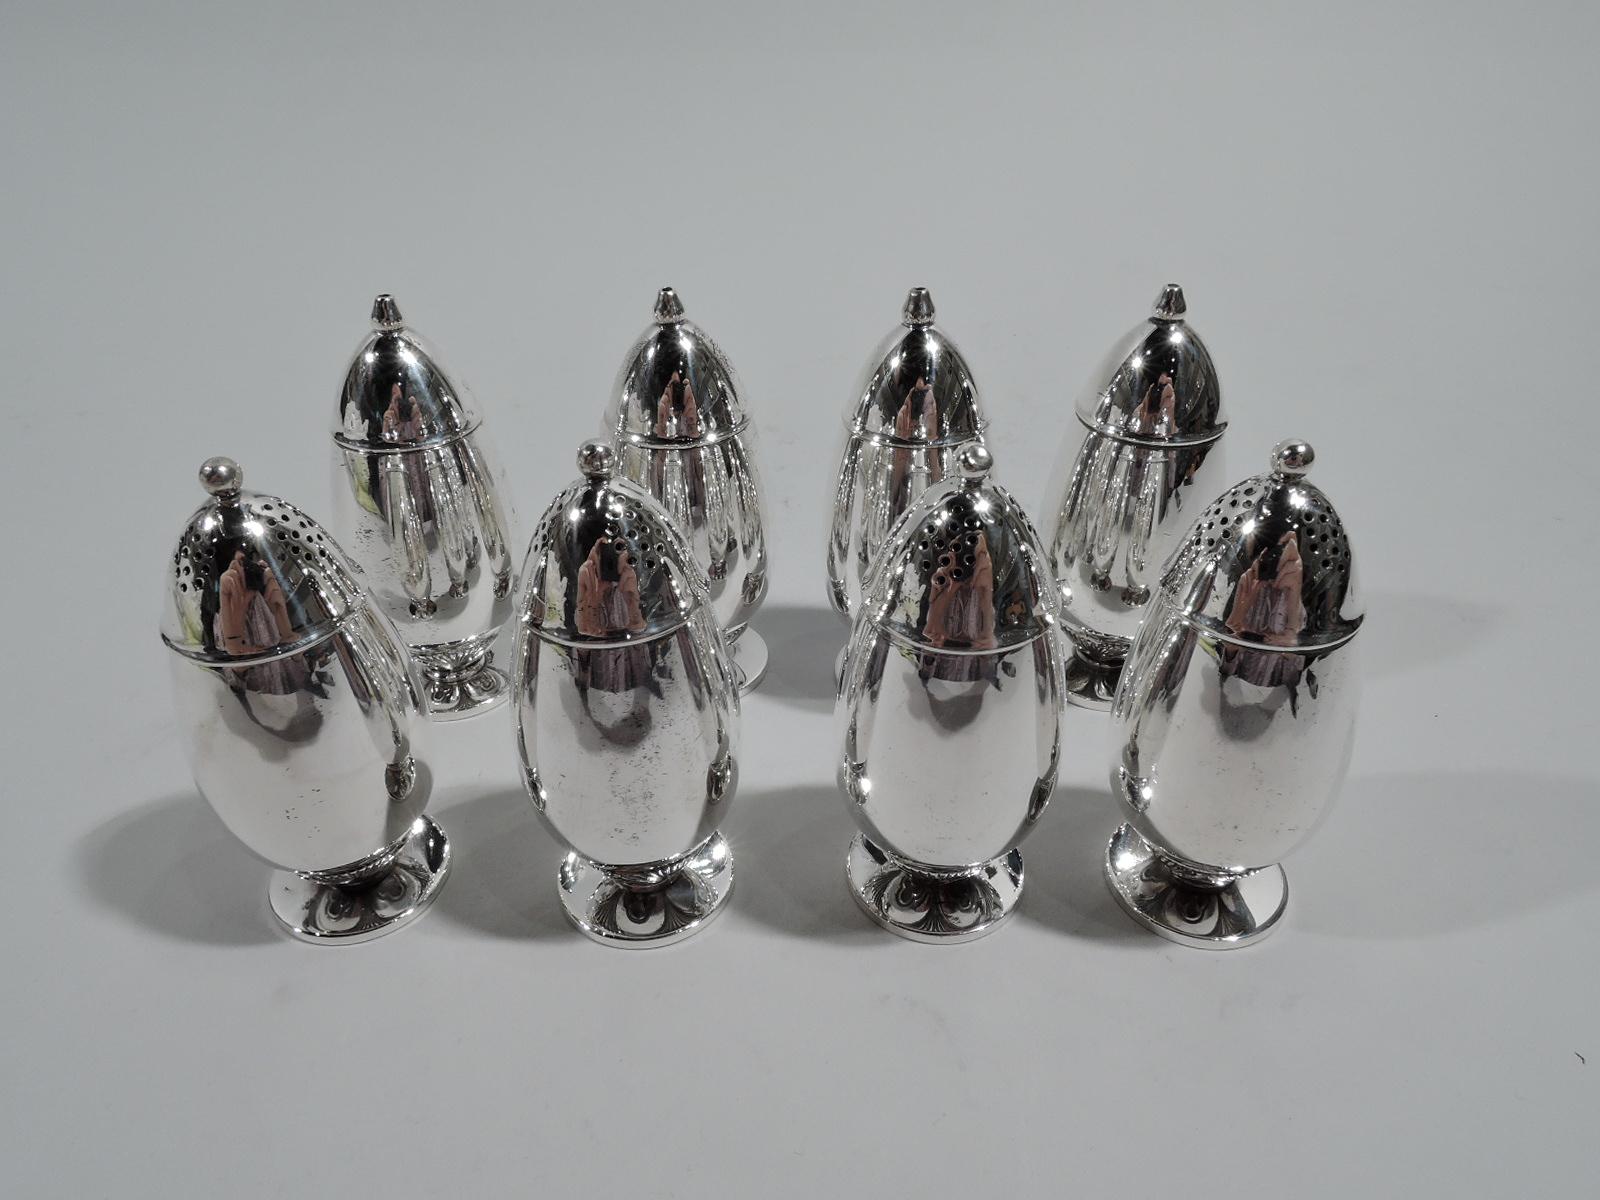 Set of 8 Cactus sterling silver salt & pepper shakers. Made by Georg Jensen in Copenhagen. Each: Ovoid body on raised round foot. Four shakers have pierced cover with bead finial. The other four have single central spout. The cactus motif is tucked